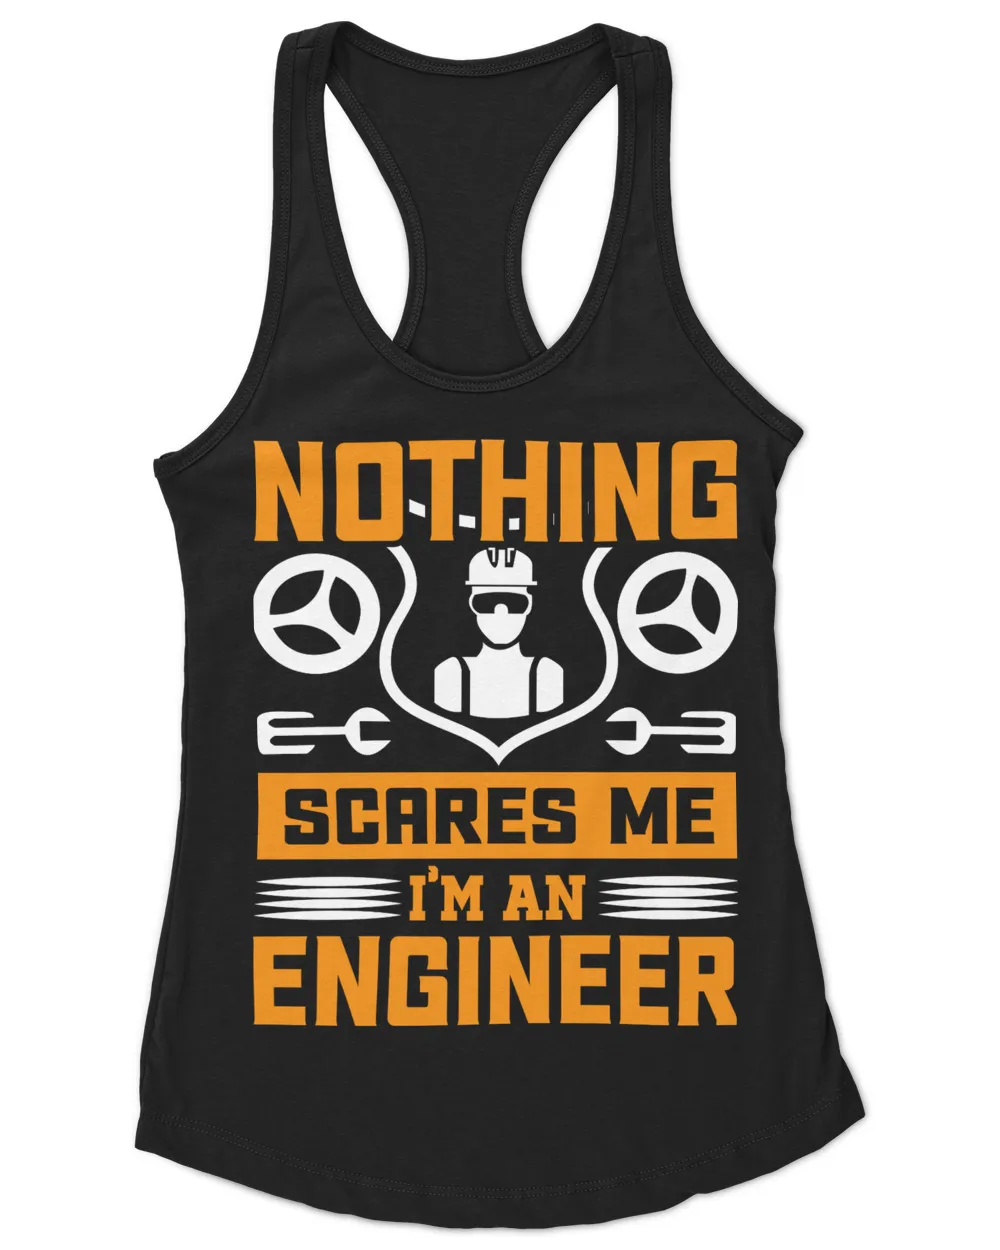 Engineer Definition Funny Engineering Gift T-Shirt (1)